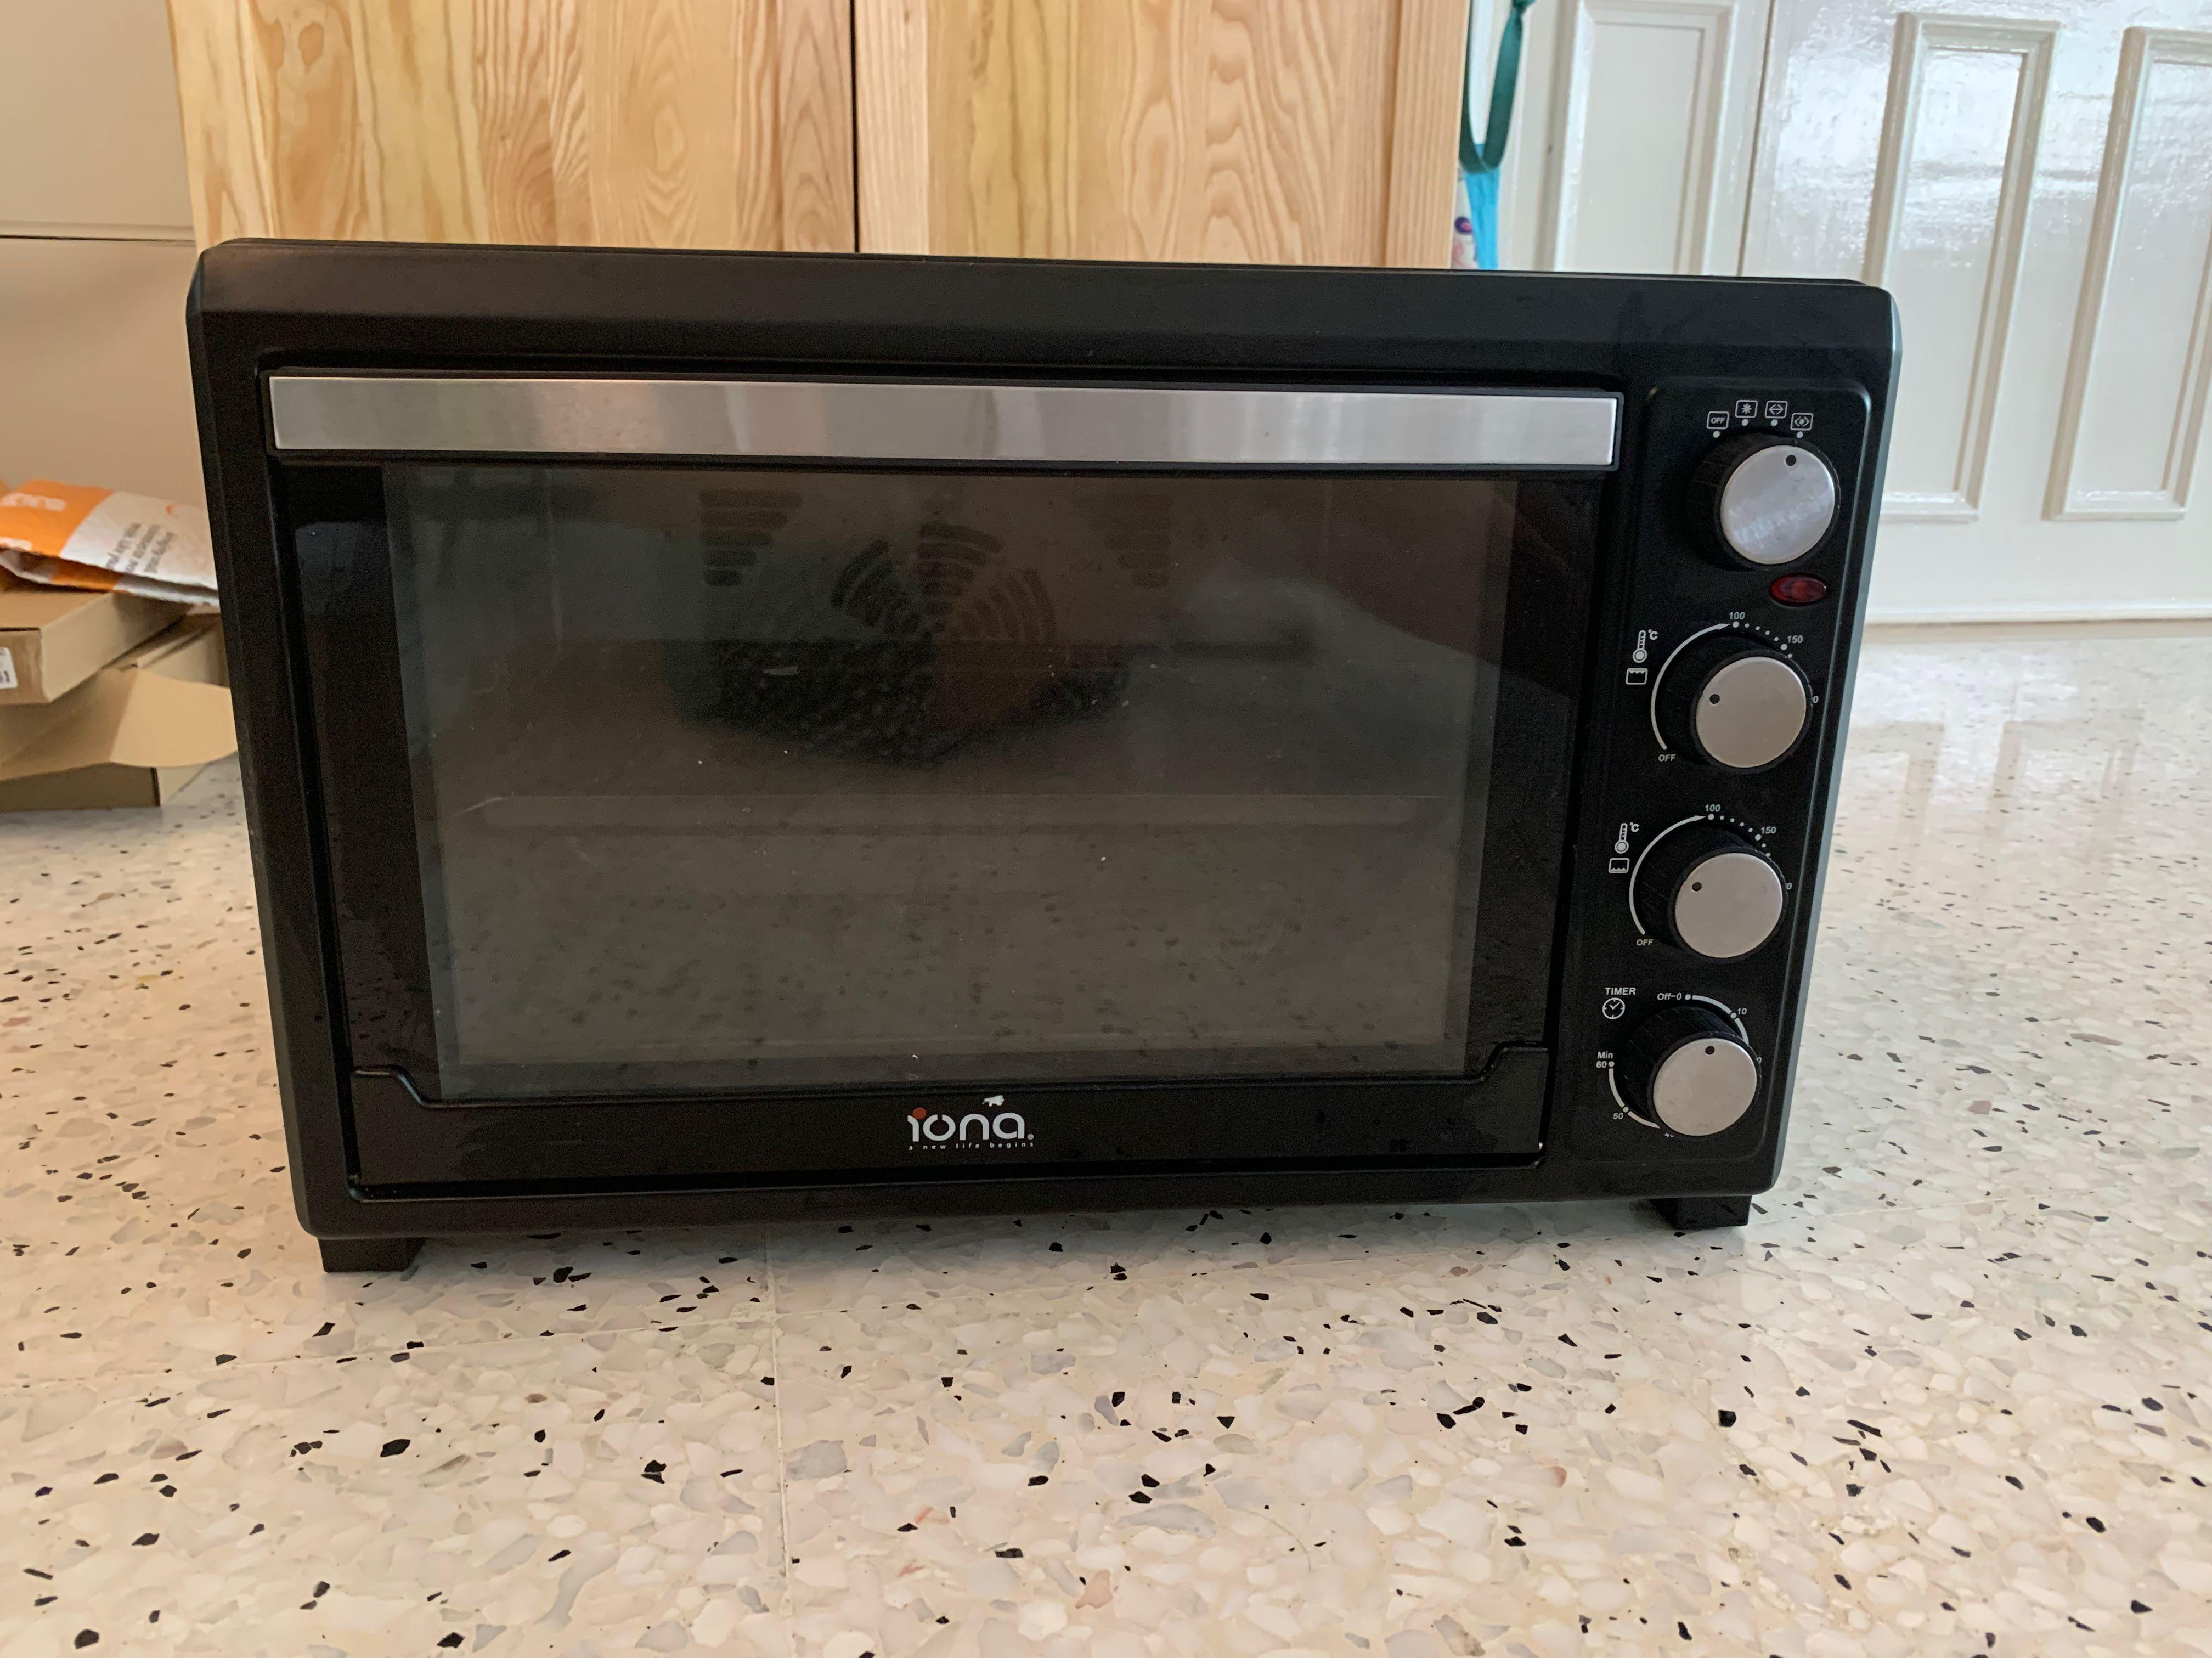 Extra Large 48L Capacity Oven with Convection and Pizza Function